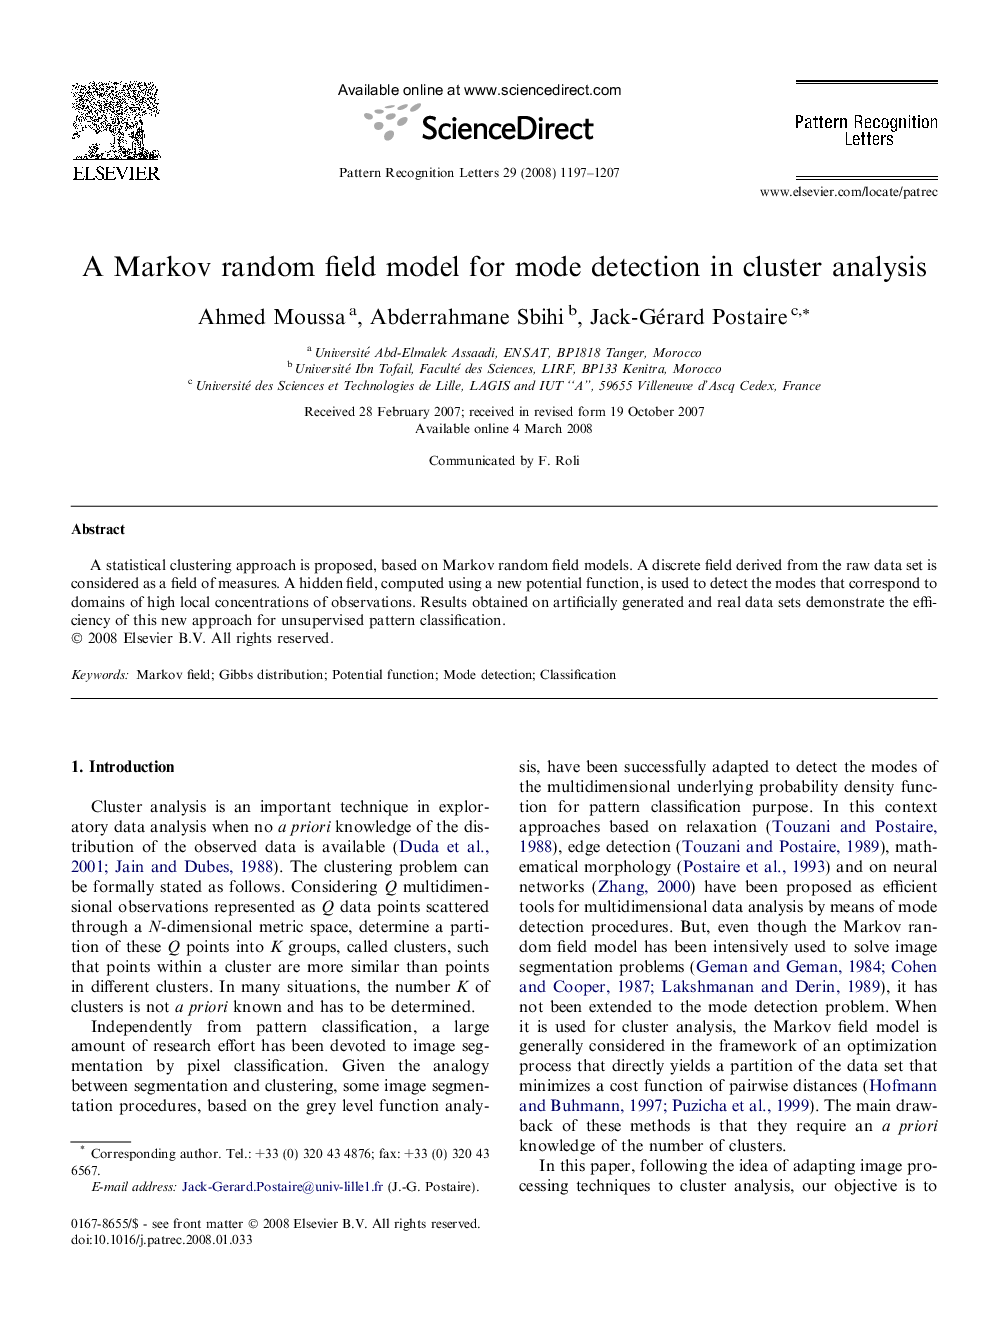 A Markov random field model for mode detection in cluster analysis